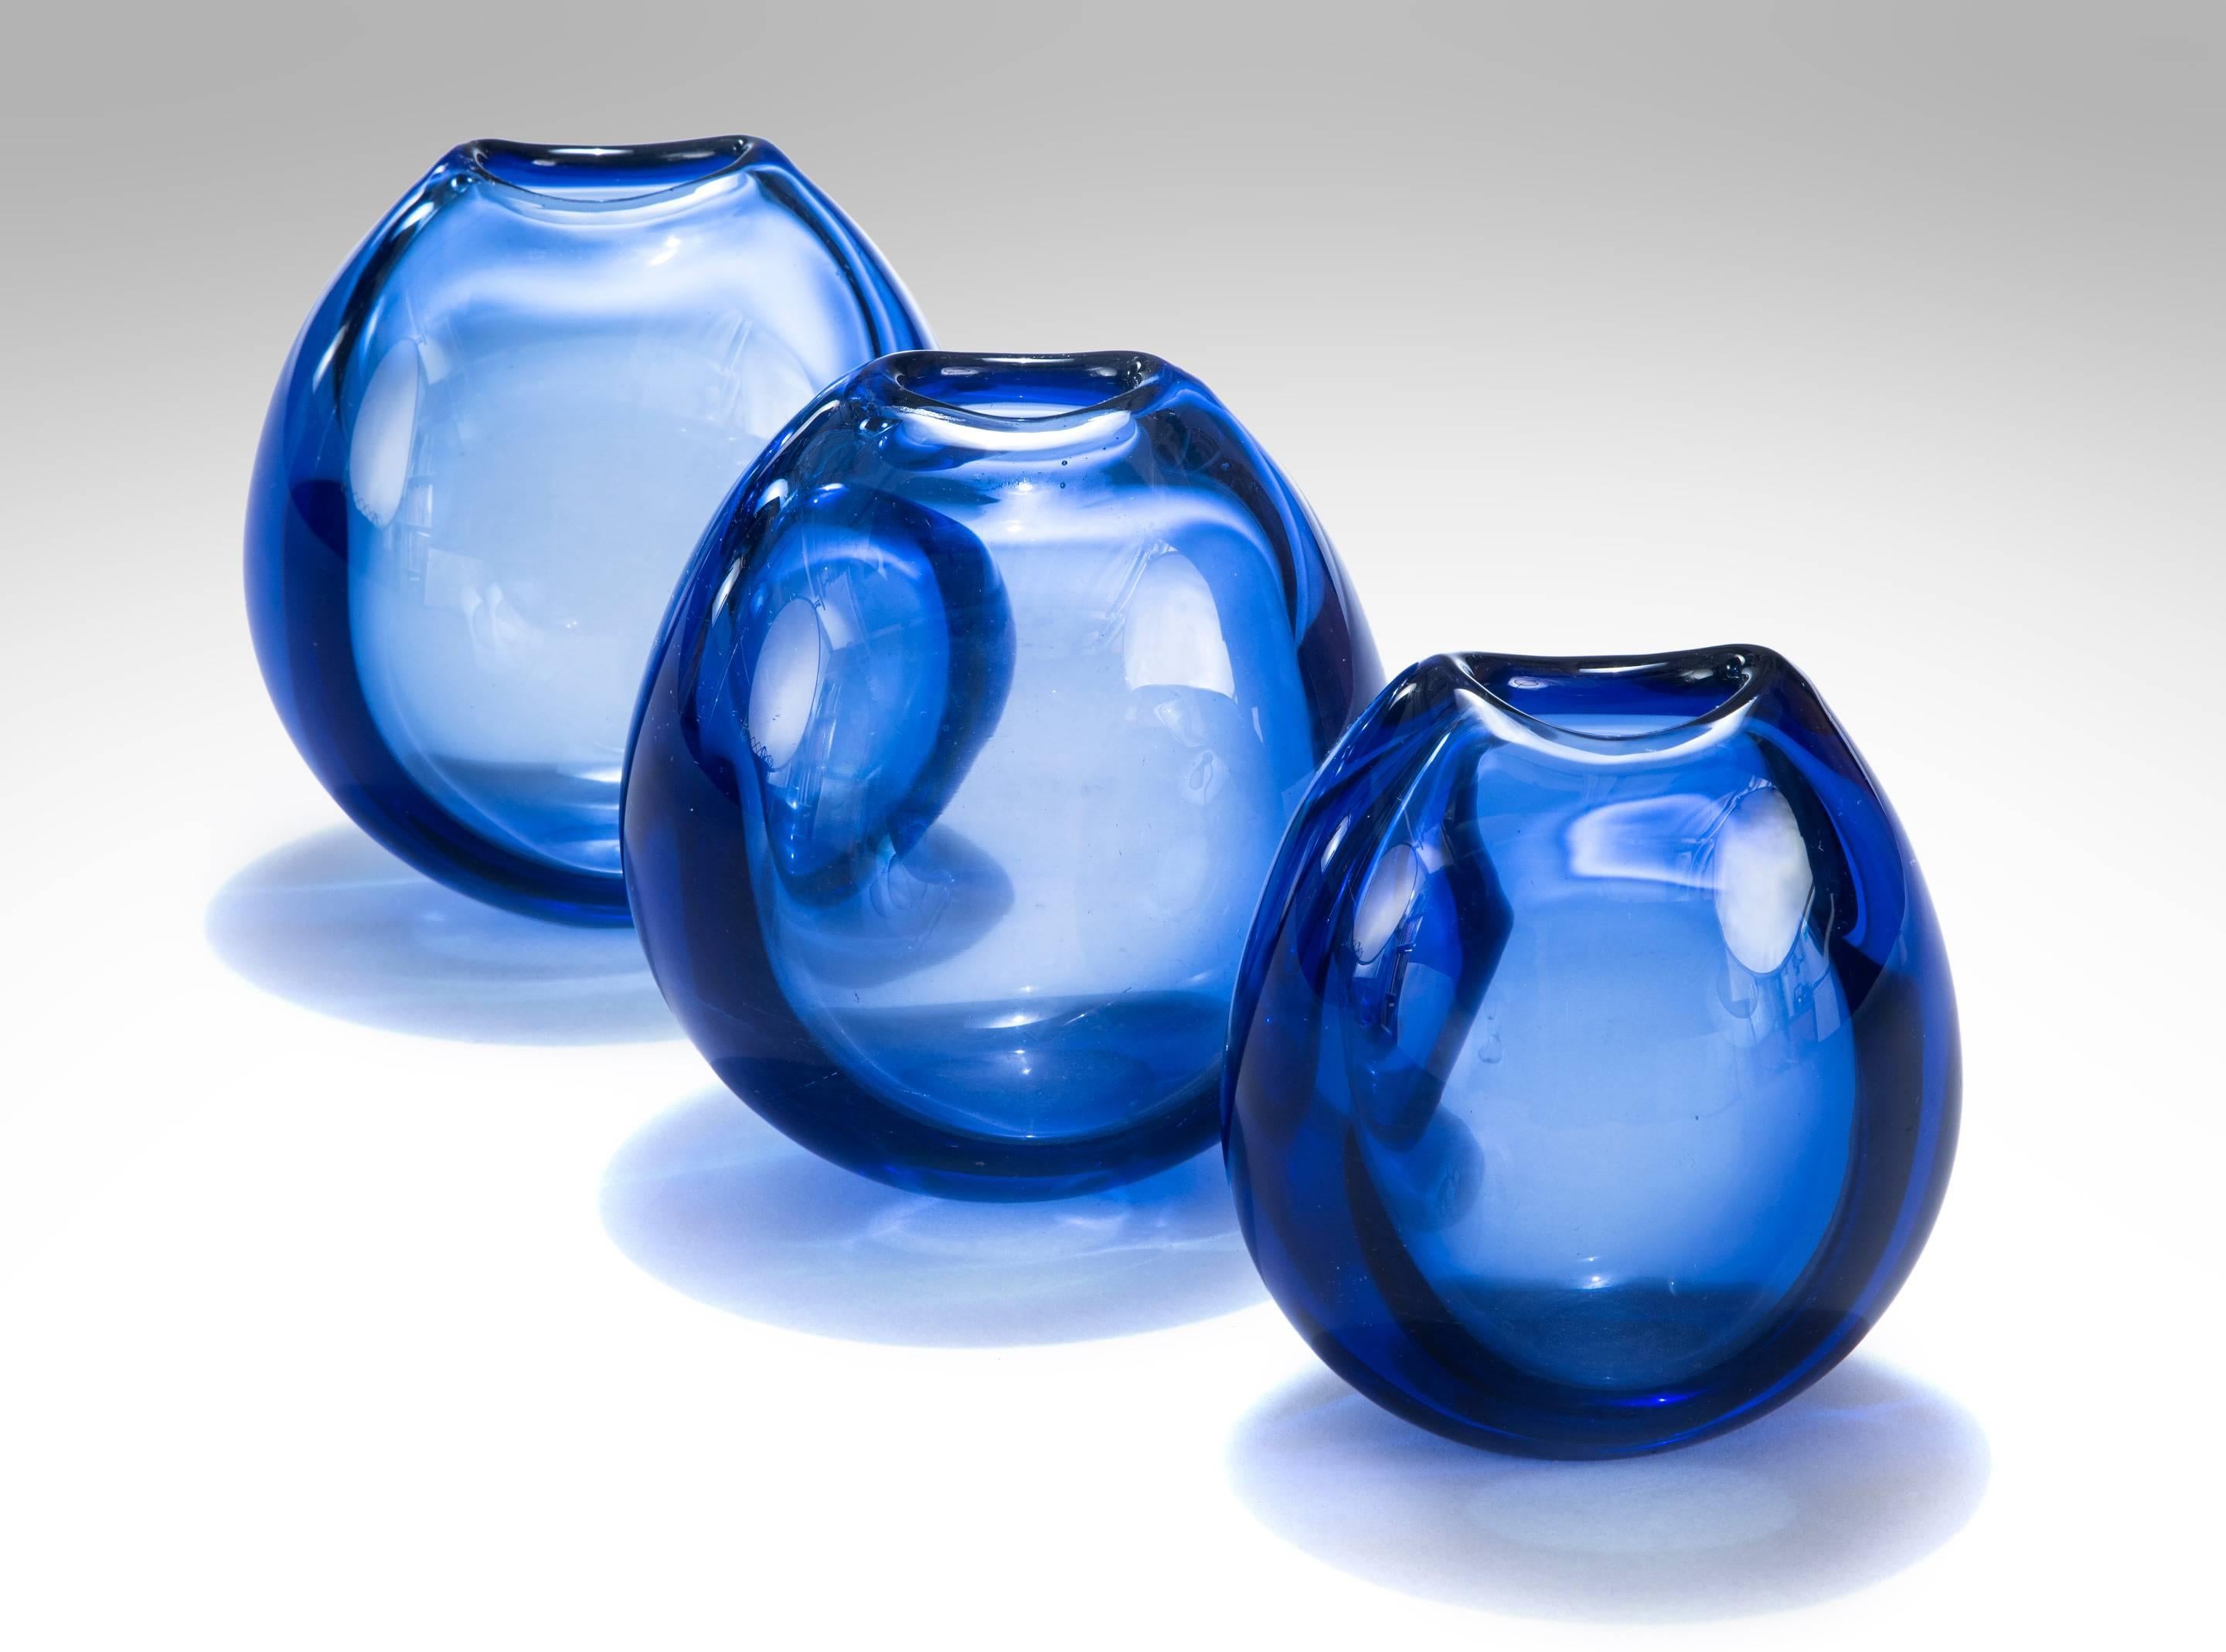 Per Lütken set of three small tear-shaped sapphire blown glass vases
1955
A perfect fusion of form and color creates these ethereal vases. The vases are hand blown resulting in each vase being unique. Of tear drop form, the top with a crescent